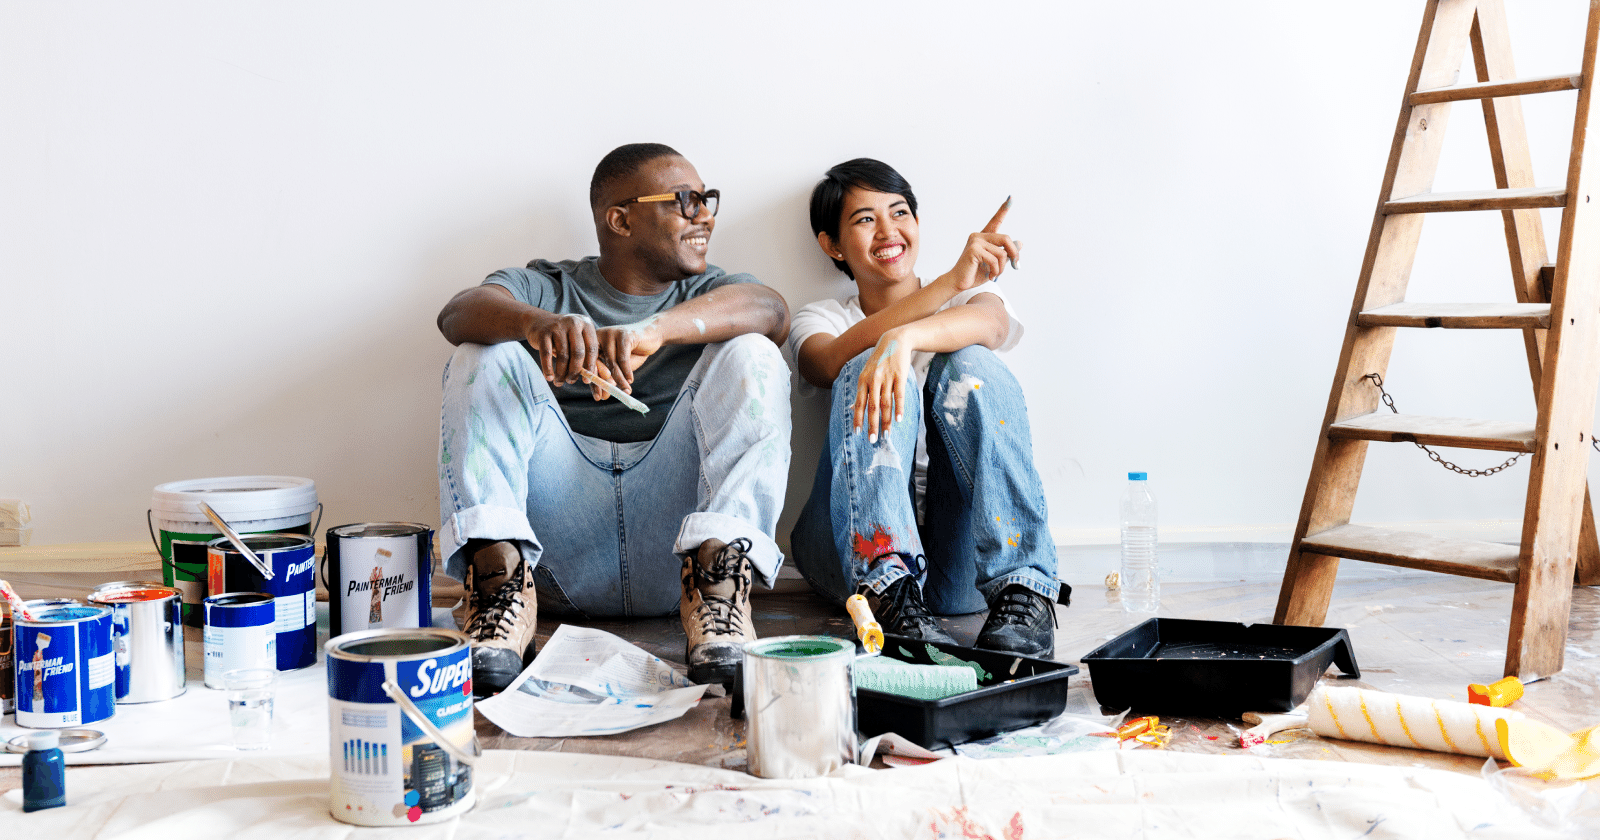 Two People Sitting Between Cans of Paint and a Ladder